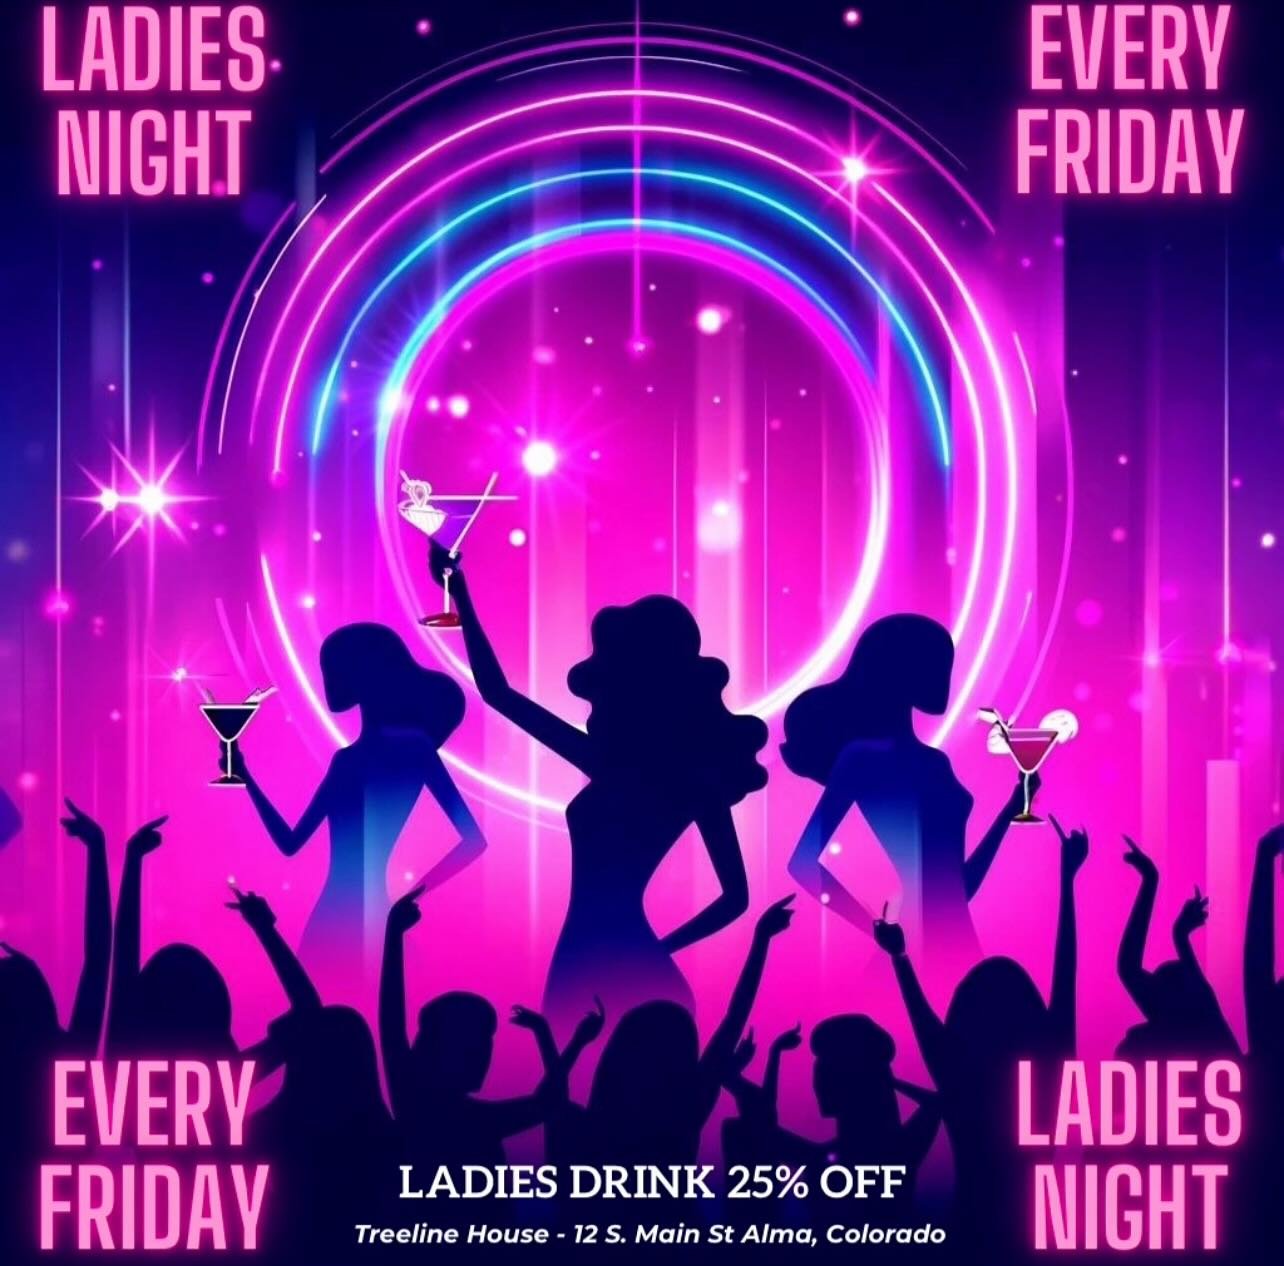 Ladies enjoy 25% off on drinks every Friday night all night long! �
.
Join us on Friday nights where you&rsquo;re the star.� Let&rsquo;s make memories that will echo long into the night! � See you this Friday for a symphony of fun, friendship, and fa